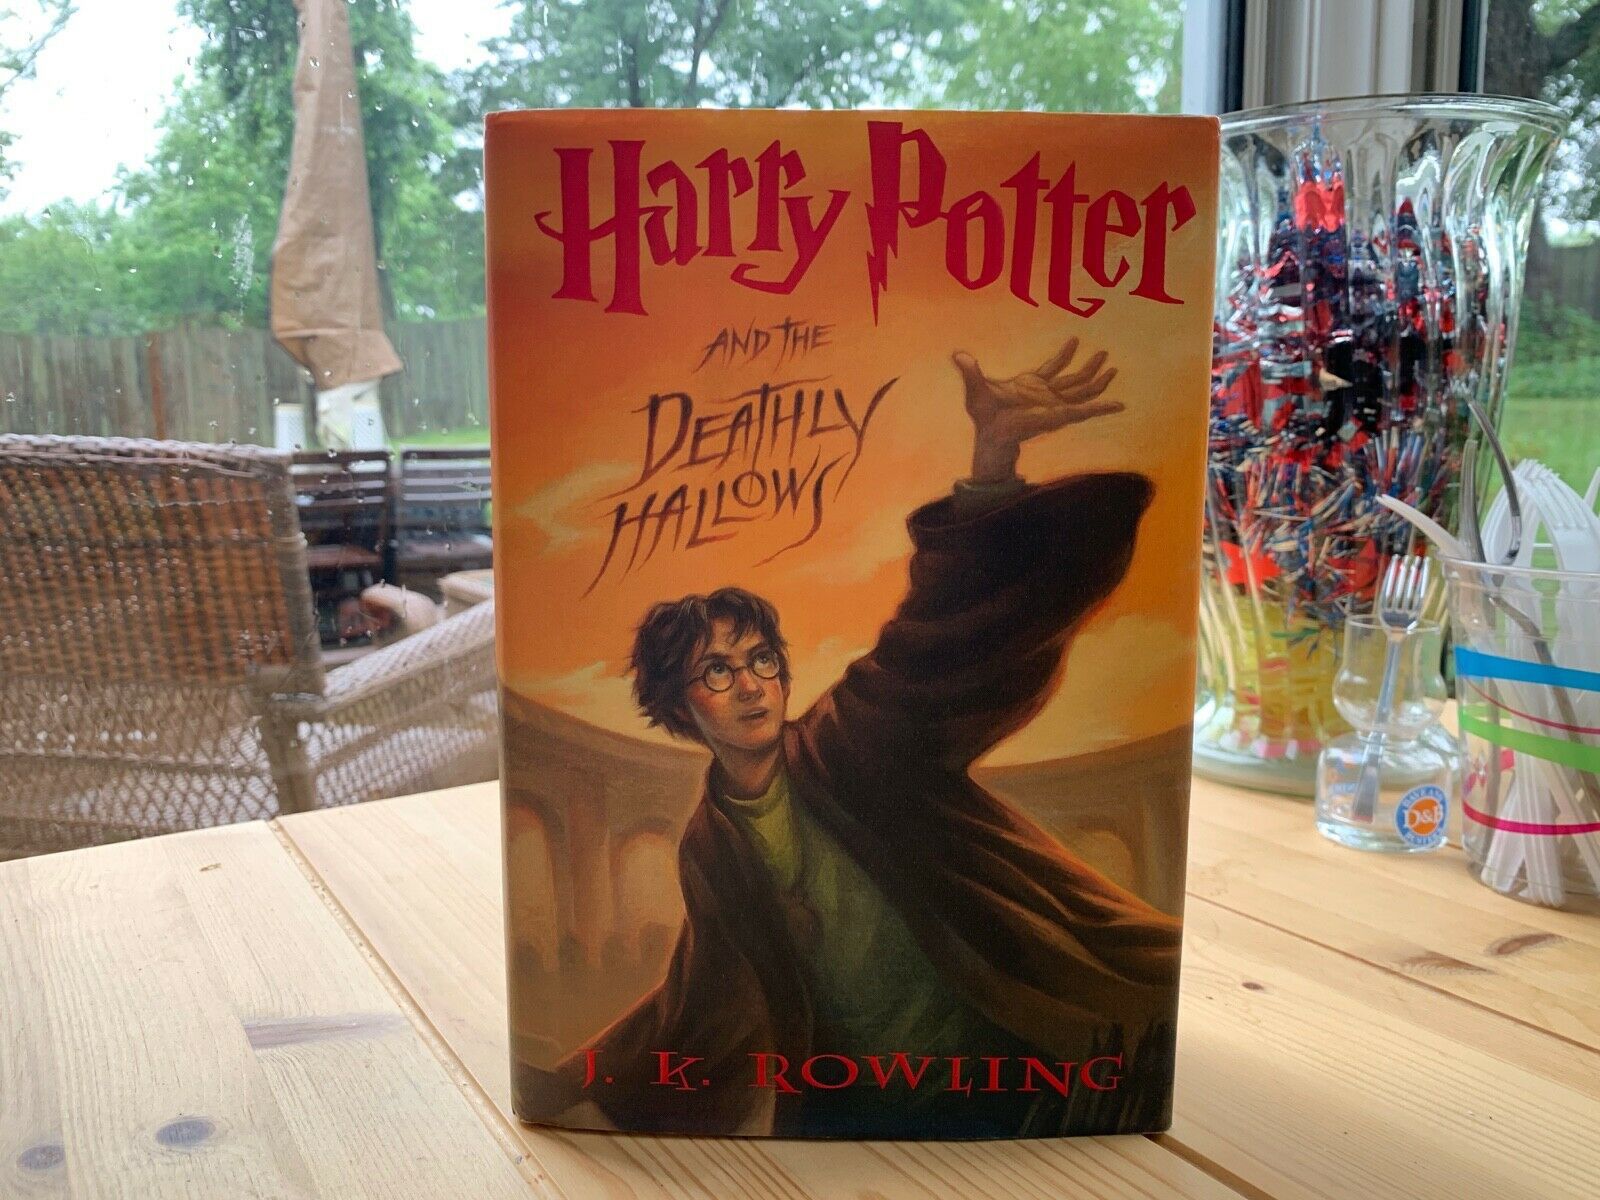 Harry Potter and the Deathly Hallows (Book 7) Hardcover Deluxe - First Edition